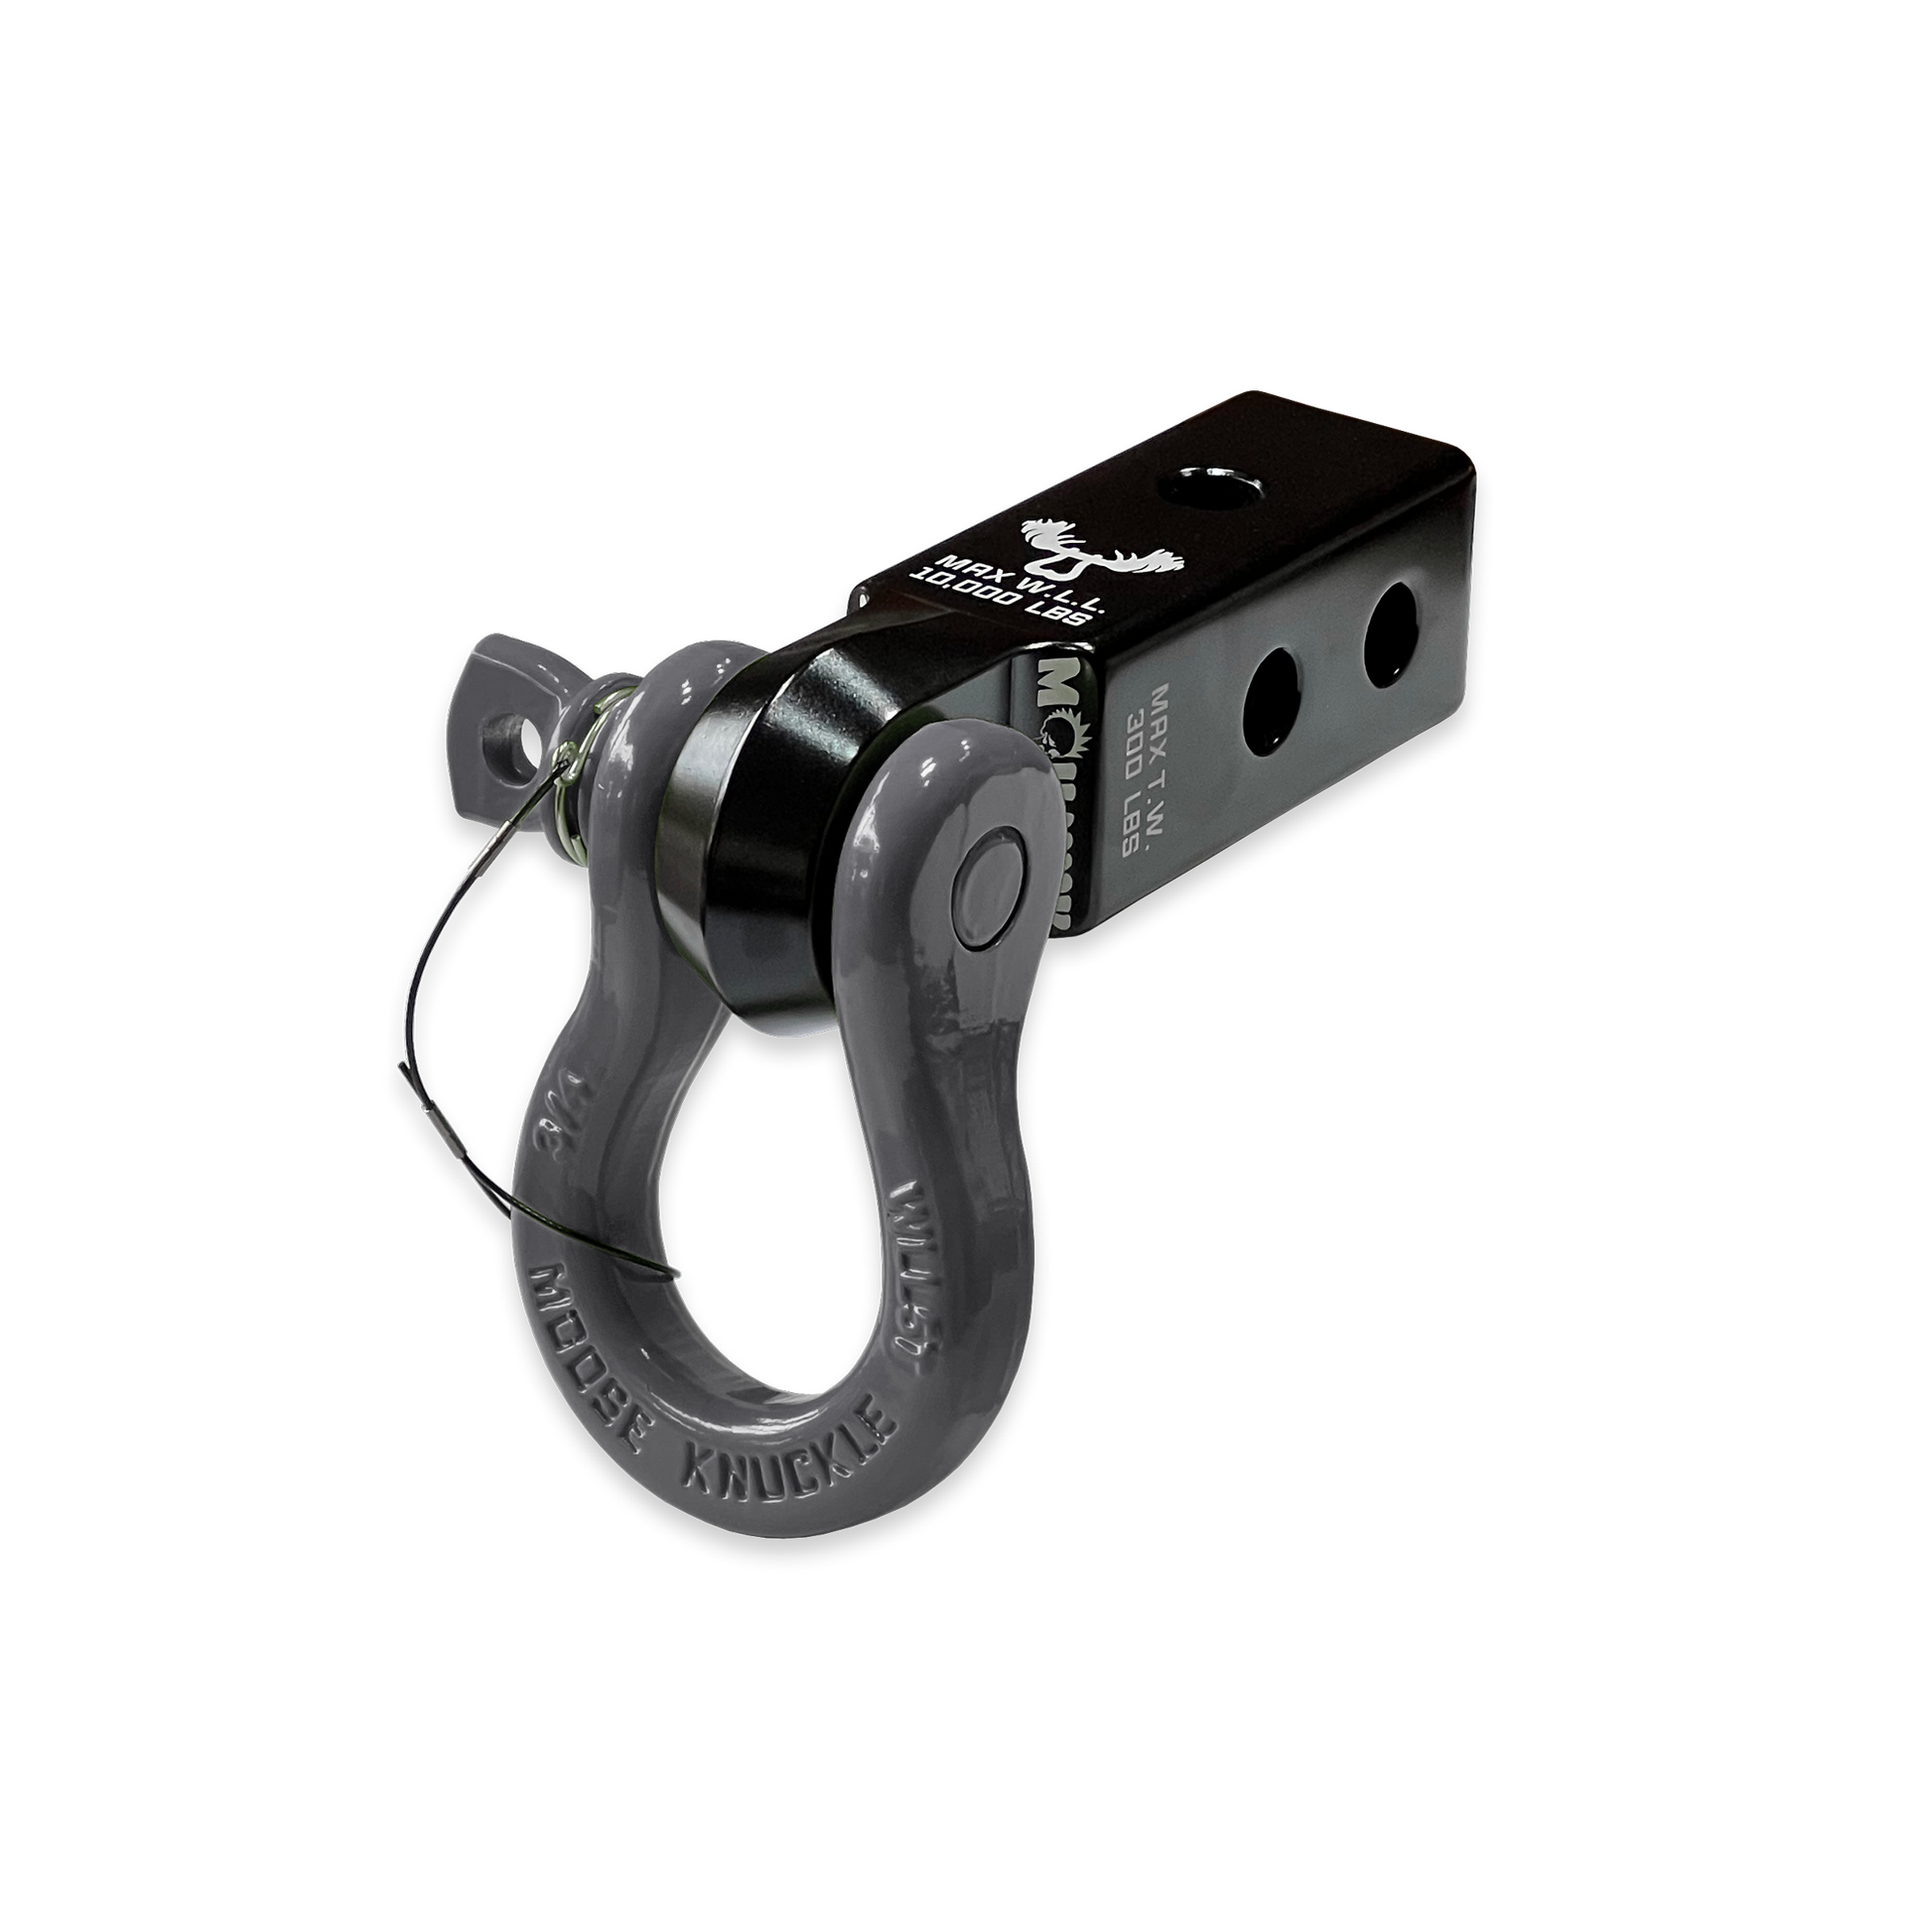 B'oh 3/4 Pin Shackle & 2.0 Receiver (Black and Gray Combo)